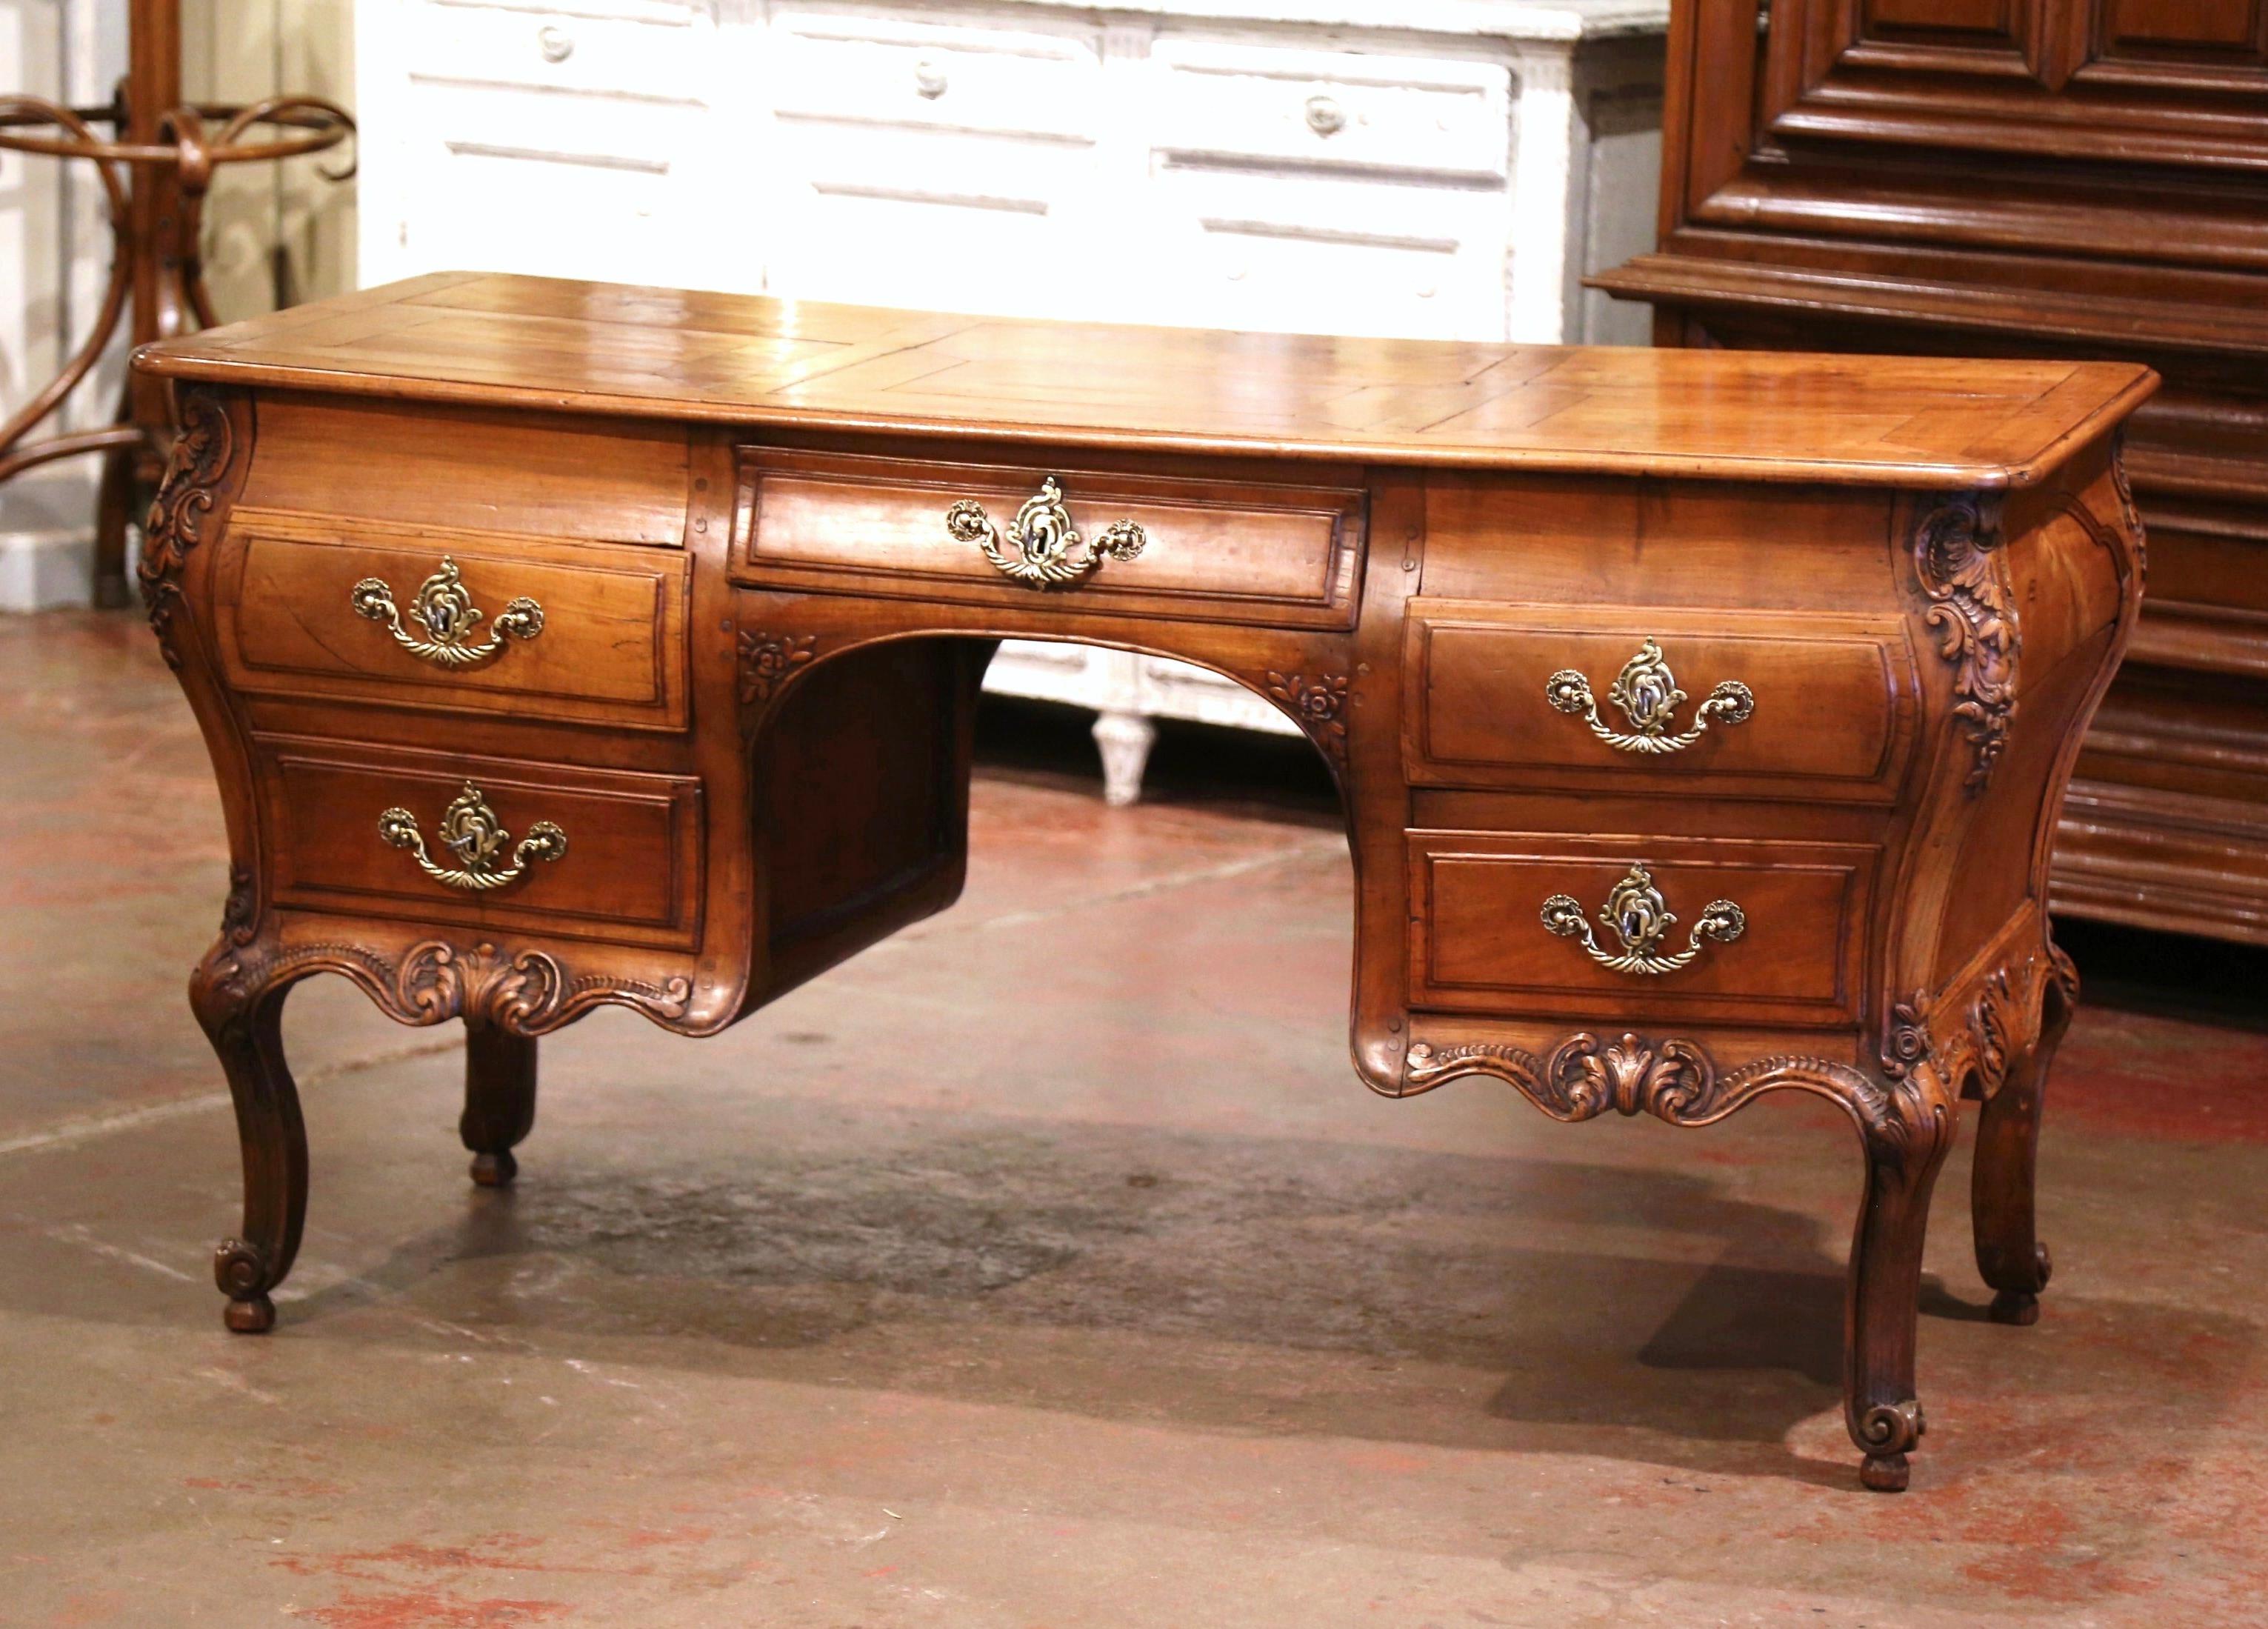 This elegant antique partner desk was created in the Poitou region of France, circa 1790. Made of wild cherry timber, the large writing table stands on nicely carved cabriole legs decorated with acanthus leaves at the shoulders, and ending with